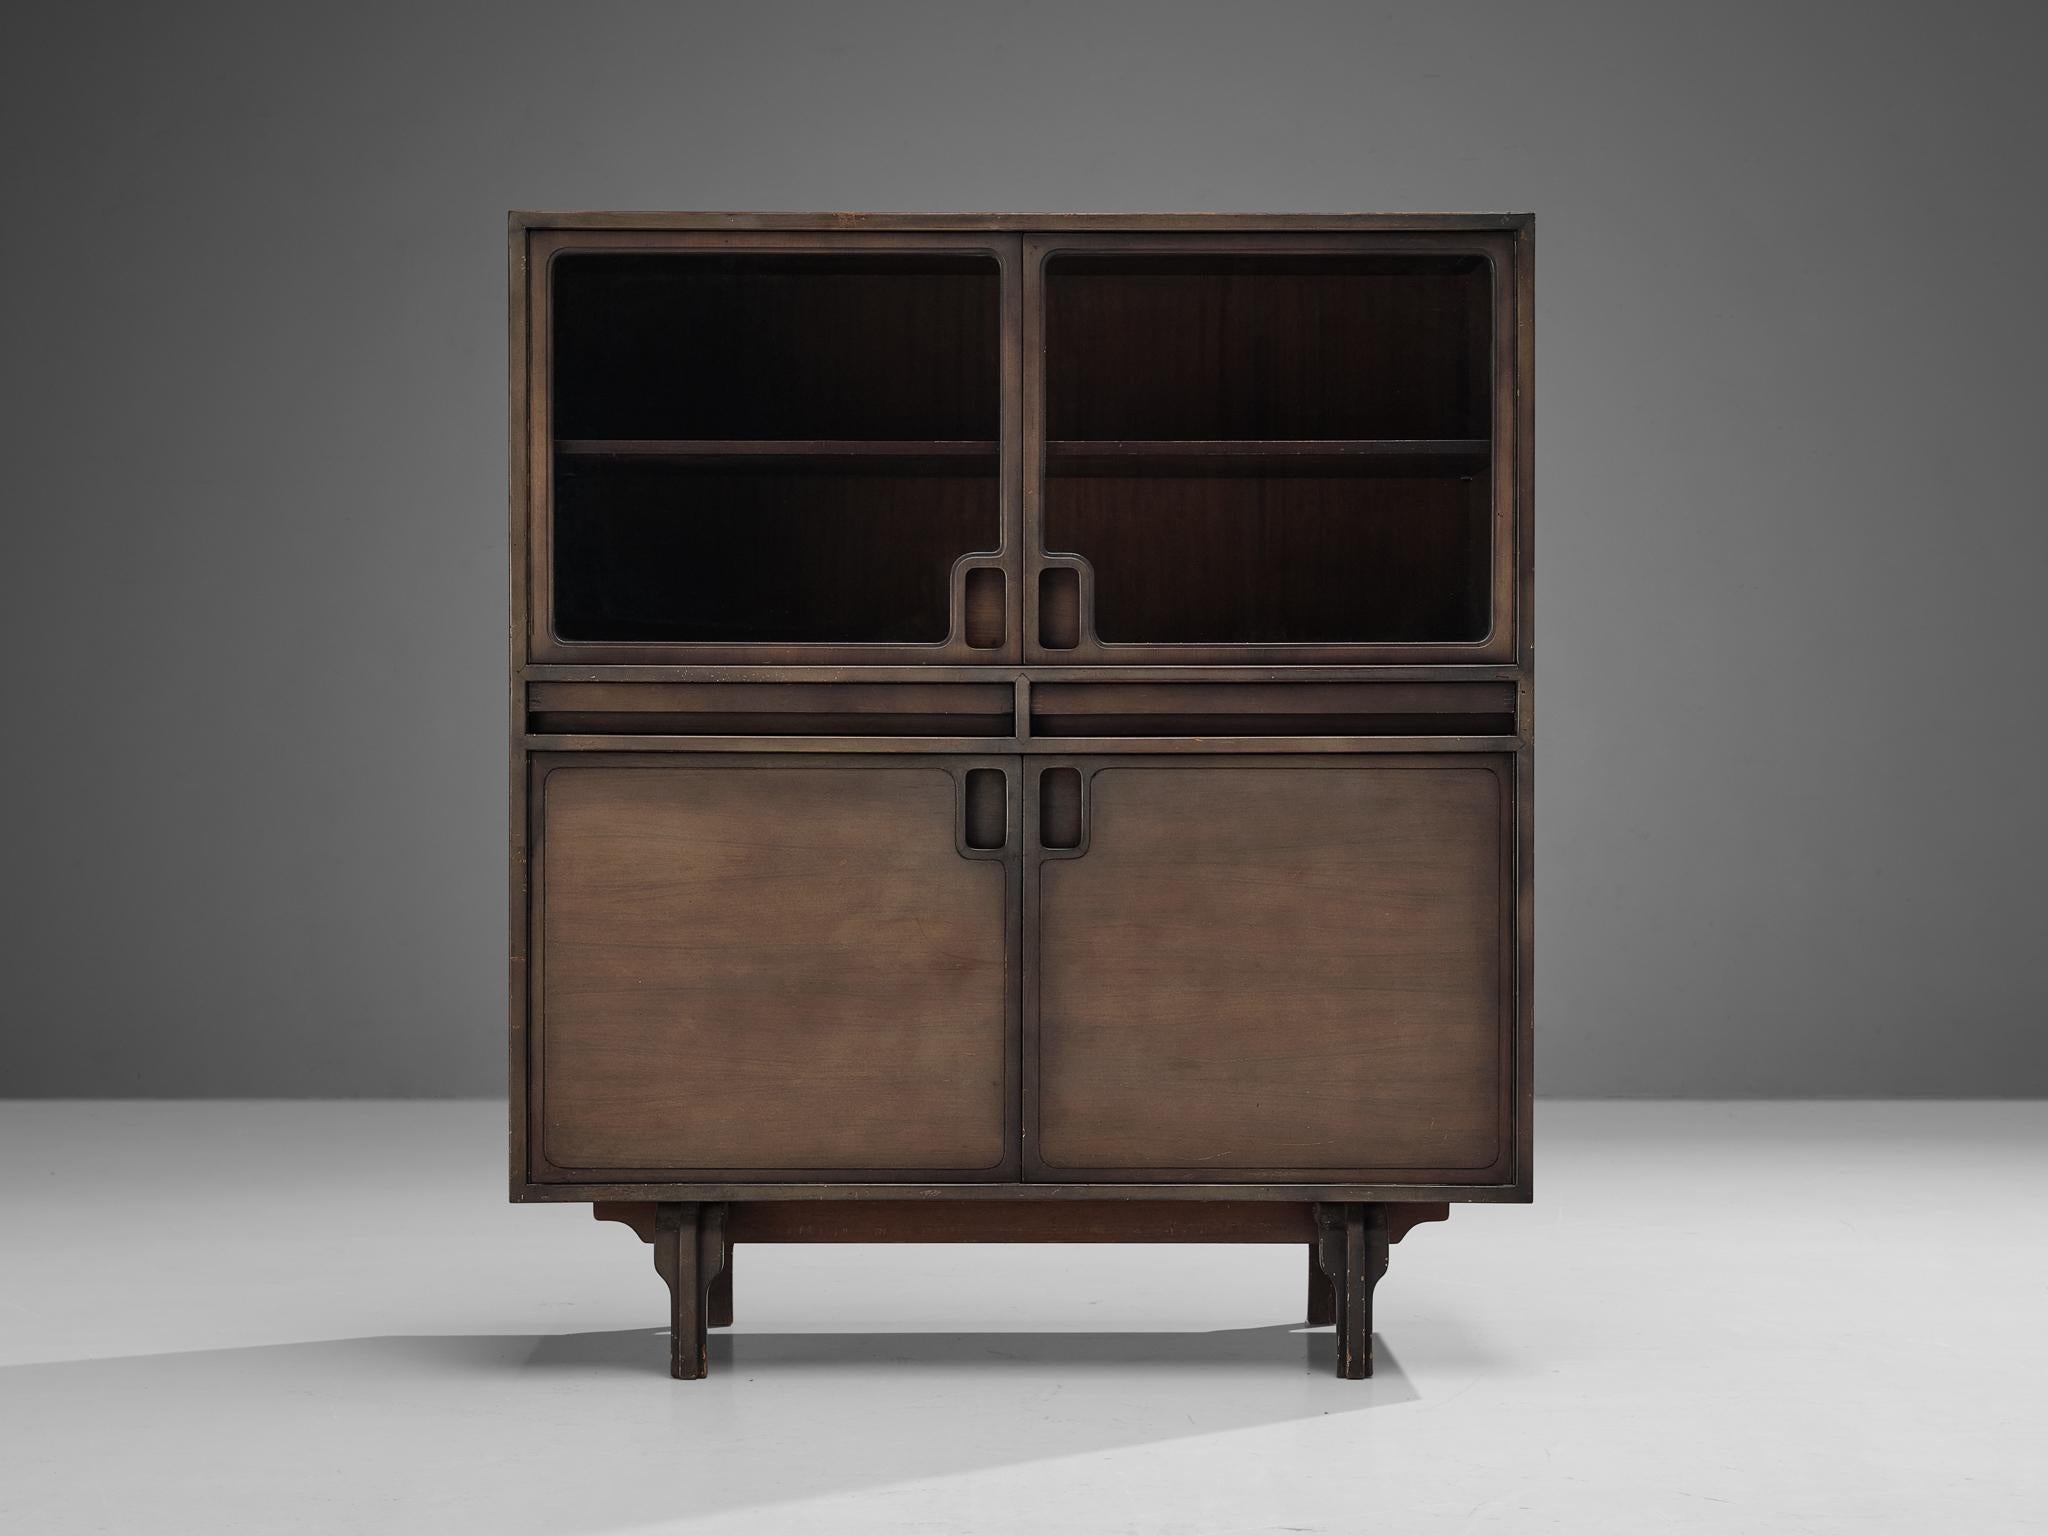 Luigi Massoni for Guzzini, wood, glass, Italy, 1960s. 

This Italian cabinet, designed by Luigi Massoni for Guzzini in the sixties, is executed in dark stained wood and glass. It consists of two wooden doors with characteristic black round inlayed